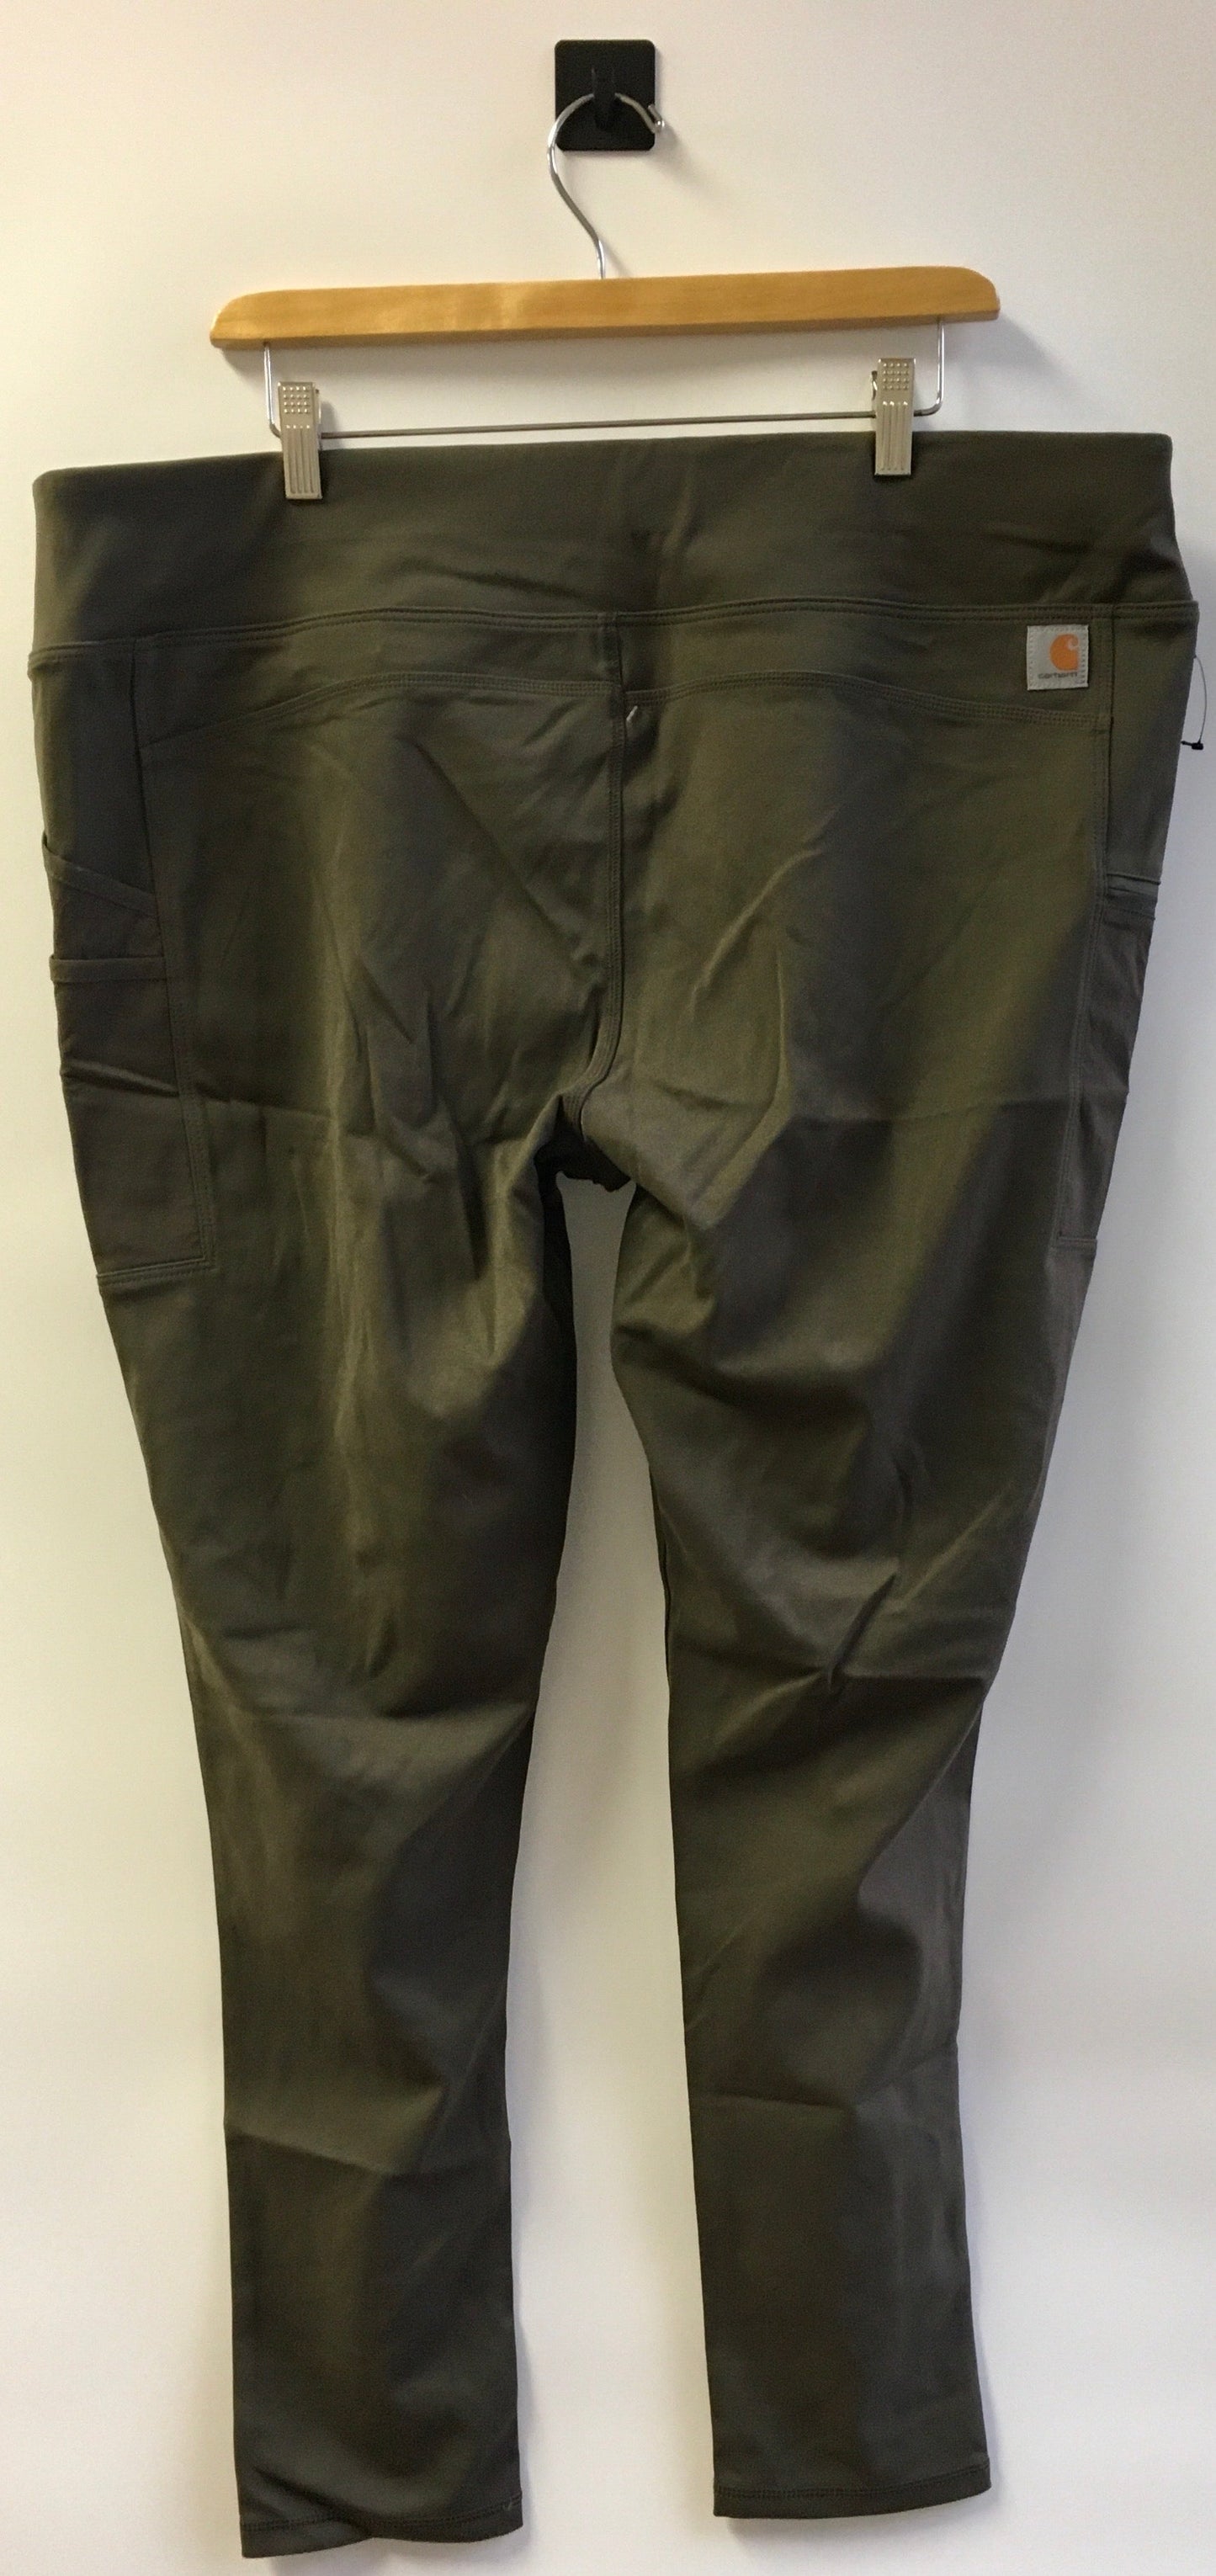 Pants Ankle By Carhart  Size: Xxl